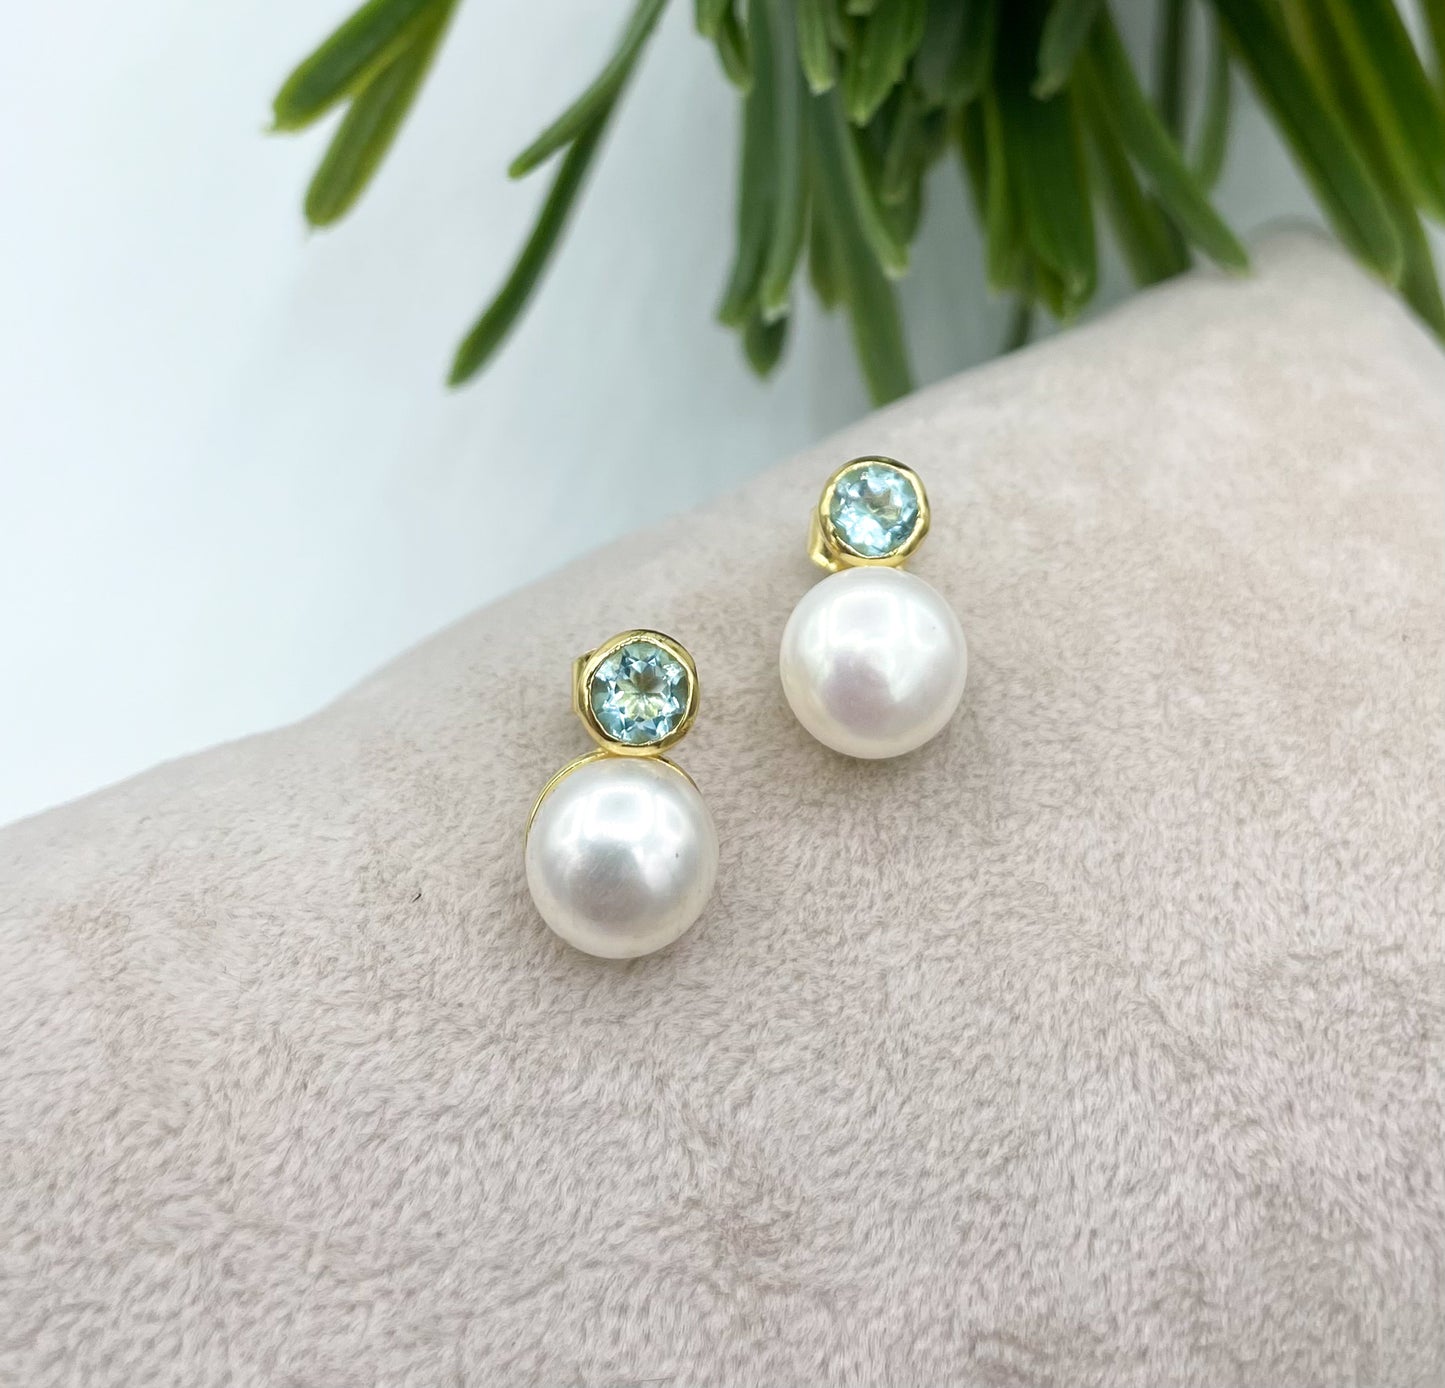 Gold blue topaz and pearl stud earrings